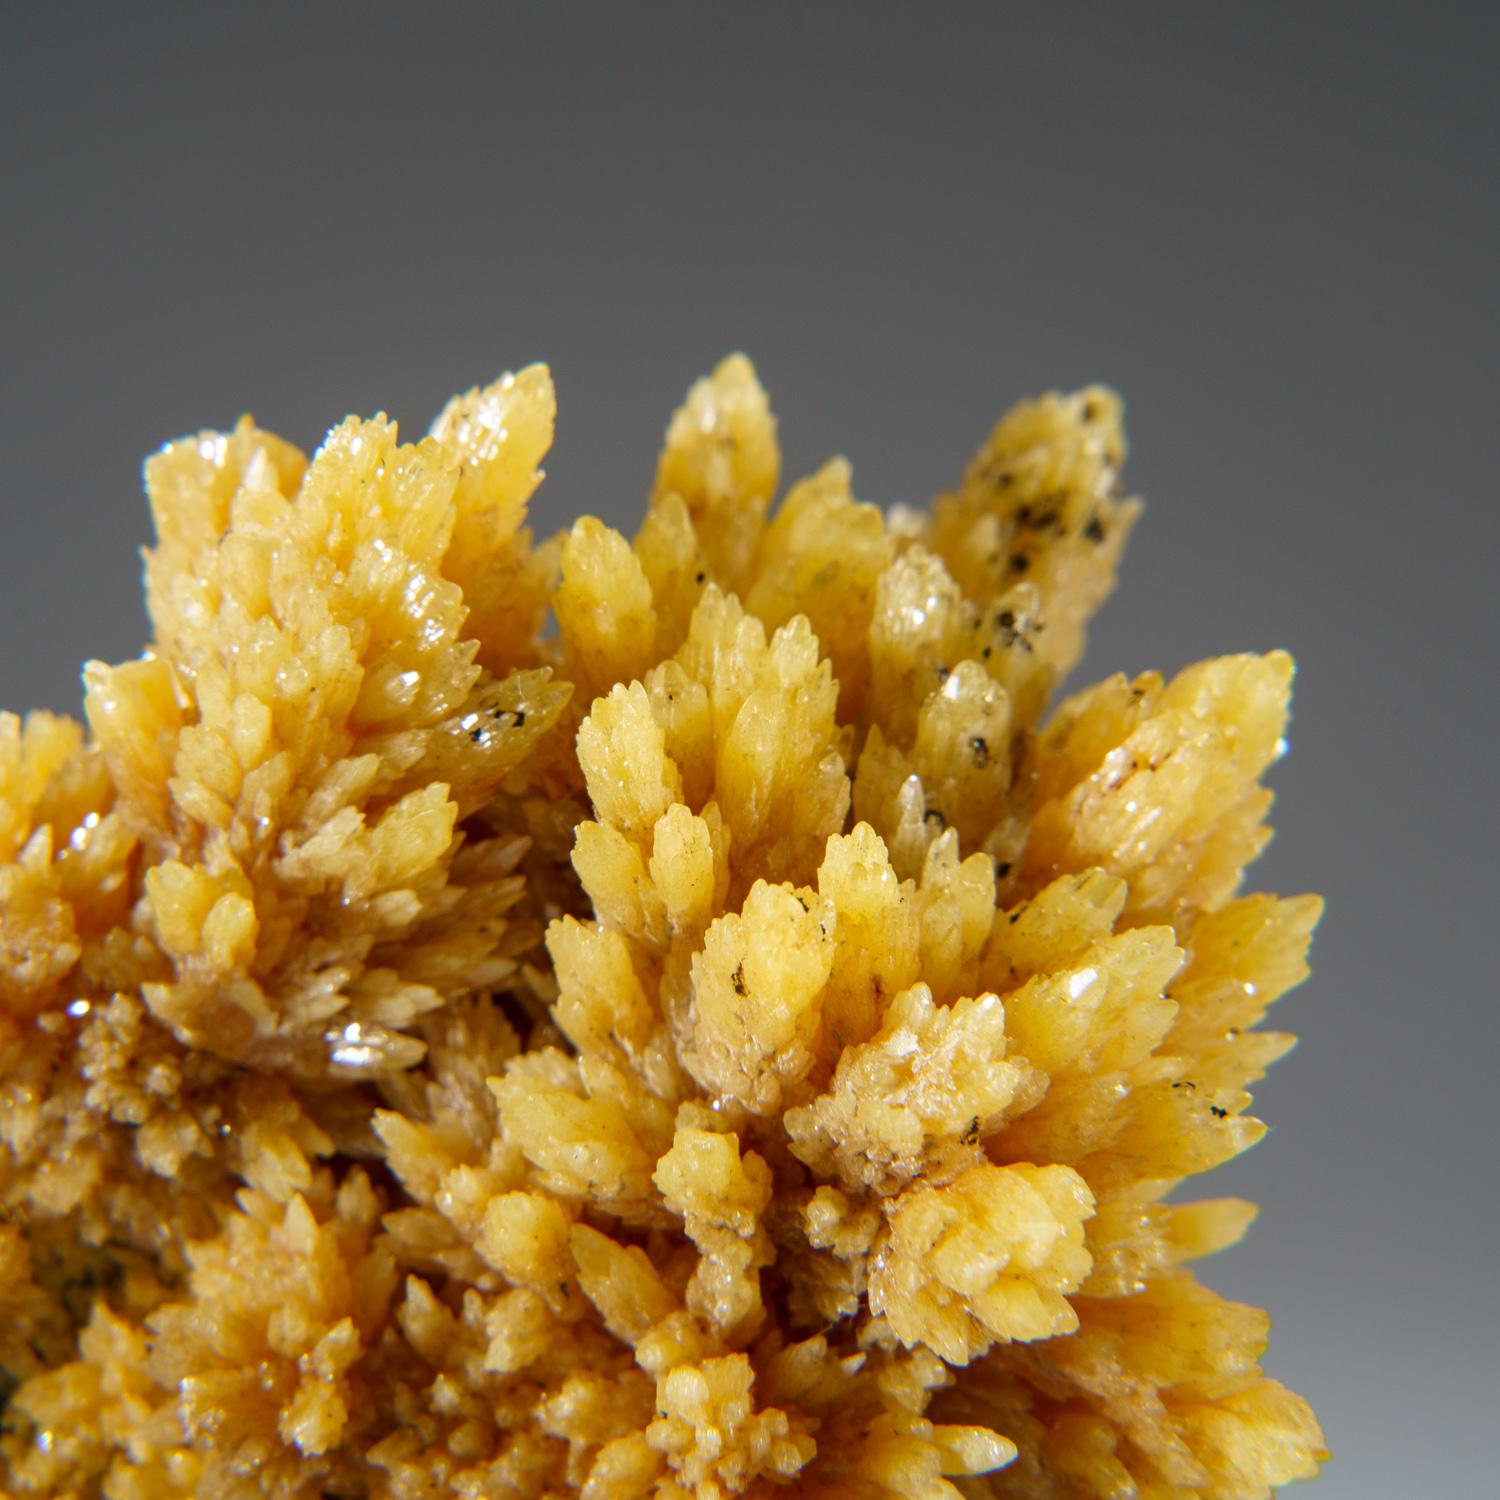 From Tsumeb Mine, Otavi-Bergland District, Oshikoto, Namibia

Rich cluster of many intersecting yellow mimetite crystals. Very lustrous, good color. The crystals are elongated and completely intact and undamaged with superb color and luster.

